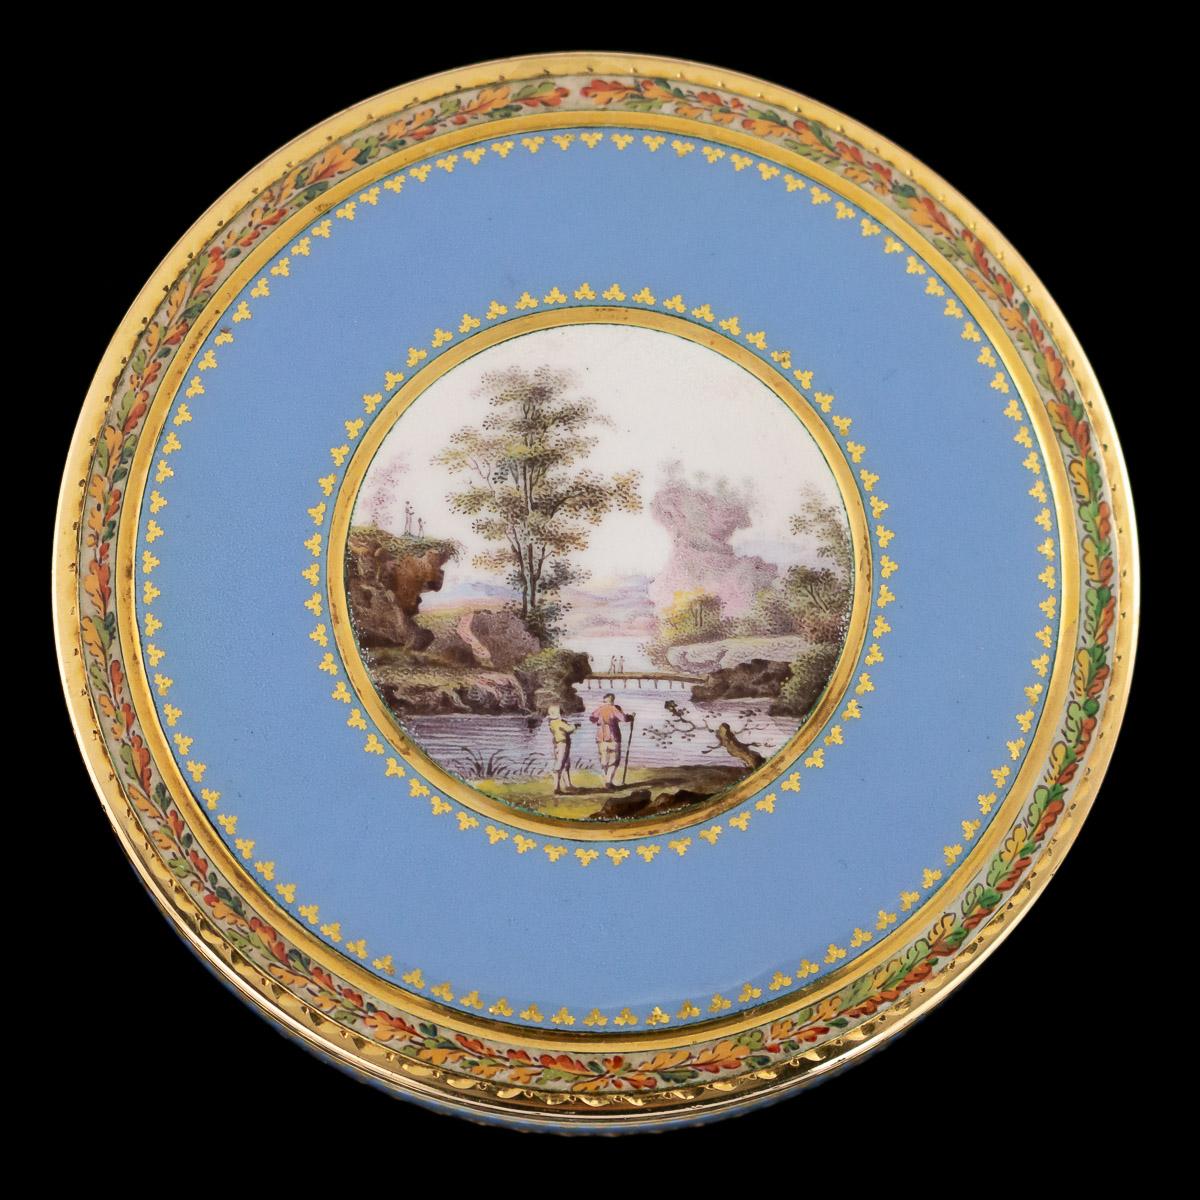 Antique early 19th century Swiss 18-karat gold bonbonniere box, the lid set with a round enamel panel painted on white ground depicting two gentleman looking at a countryside landscape, within a fine gilt leaf frame, surrounded by translucent blue